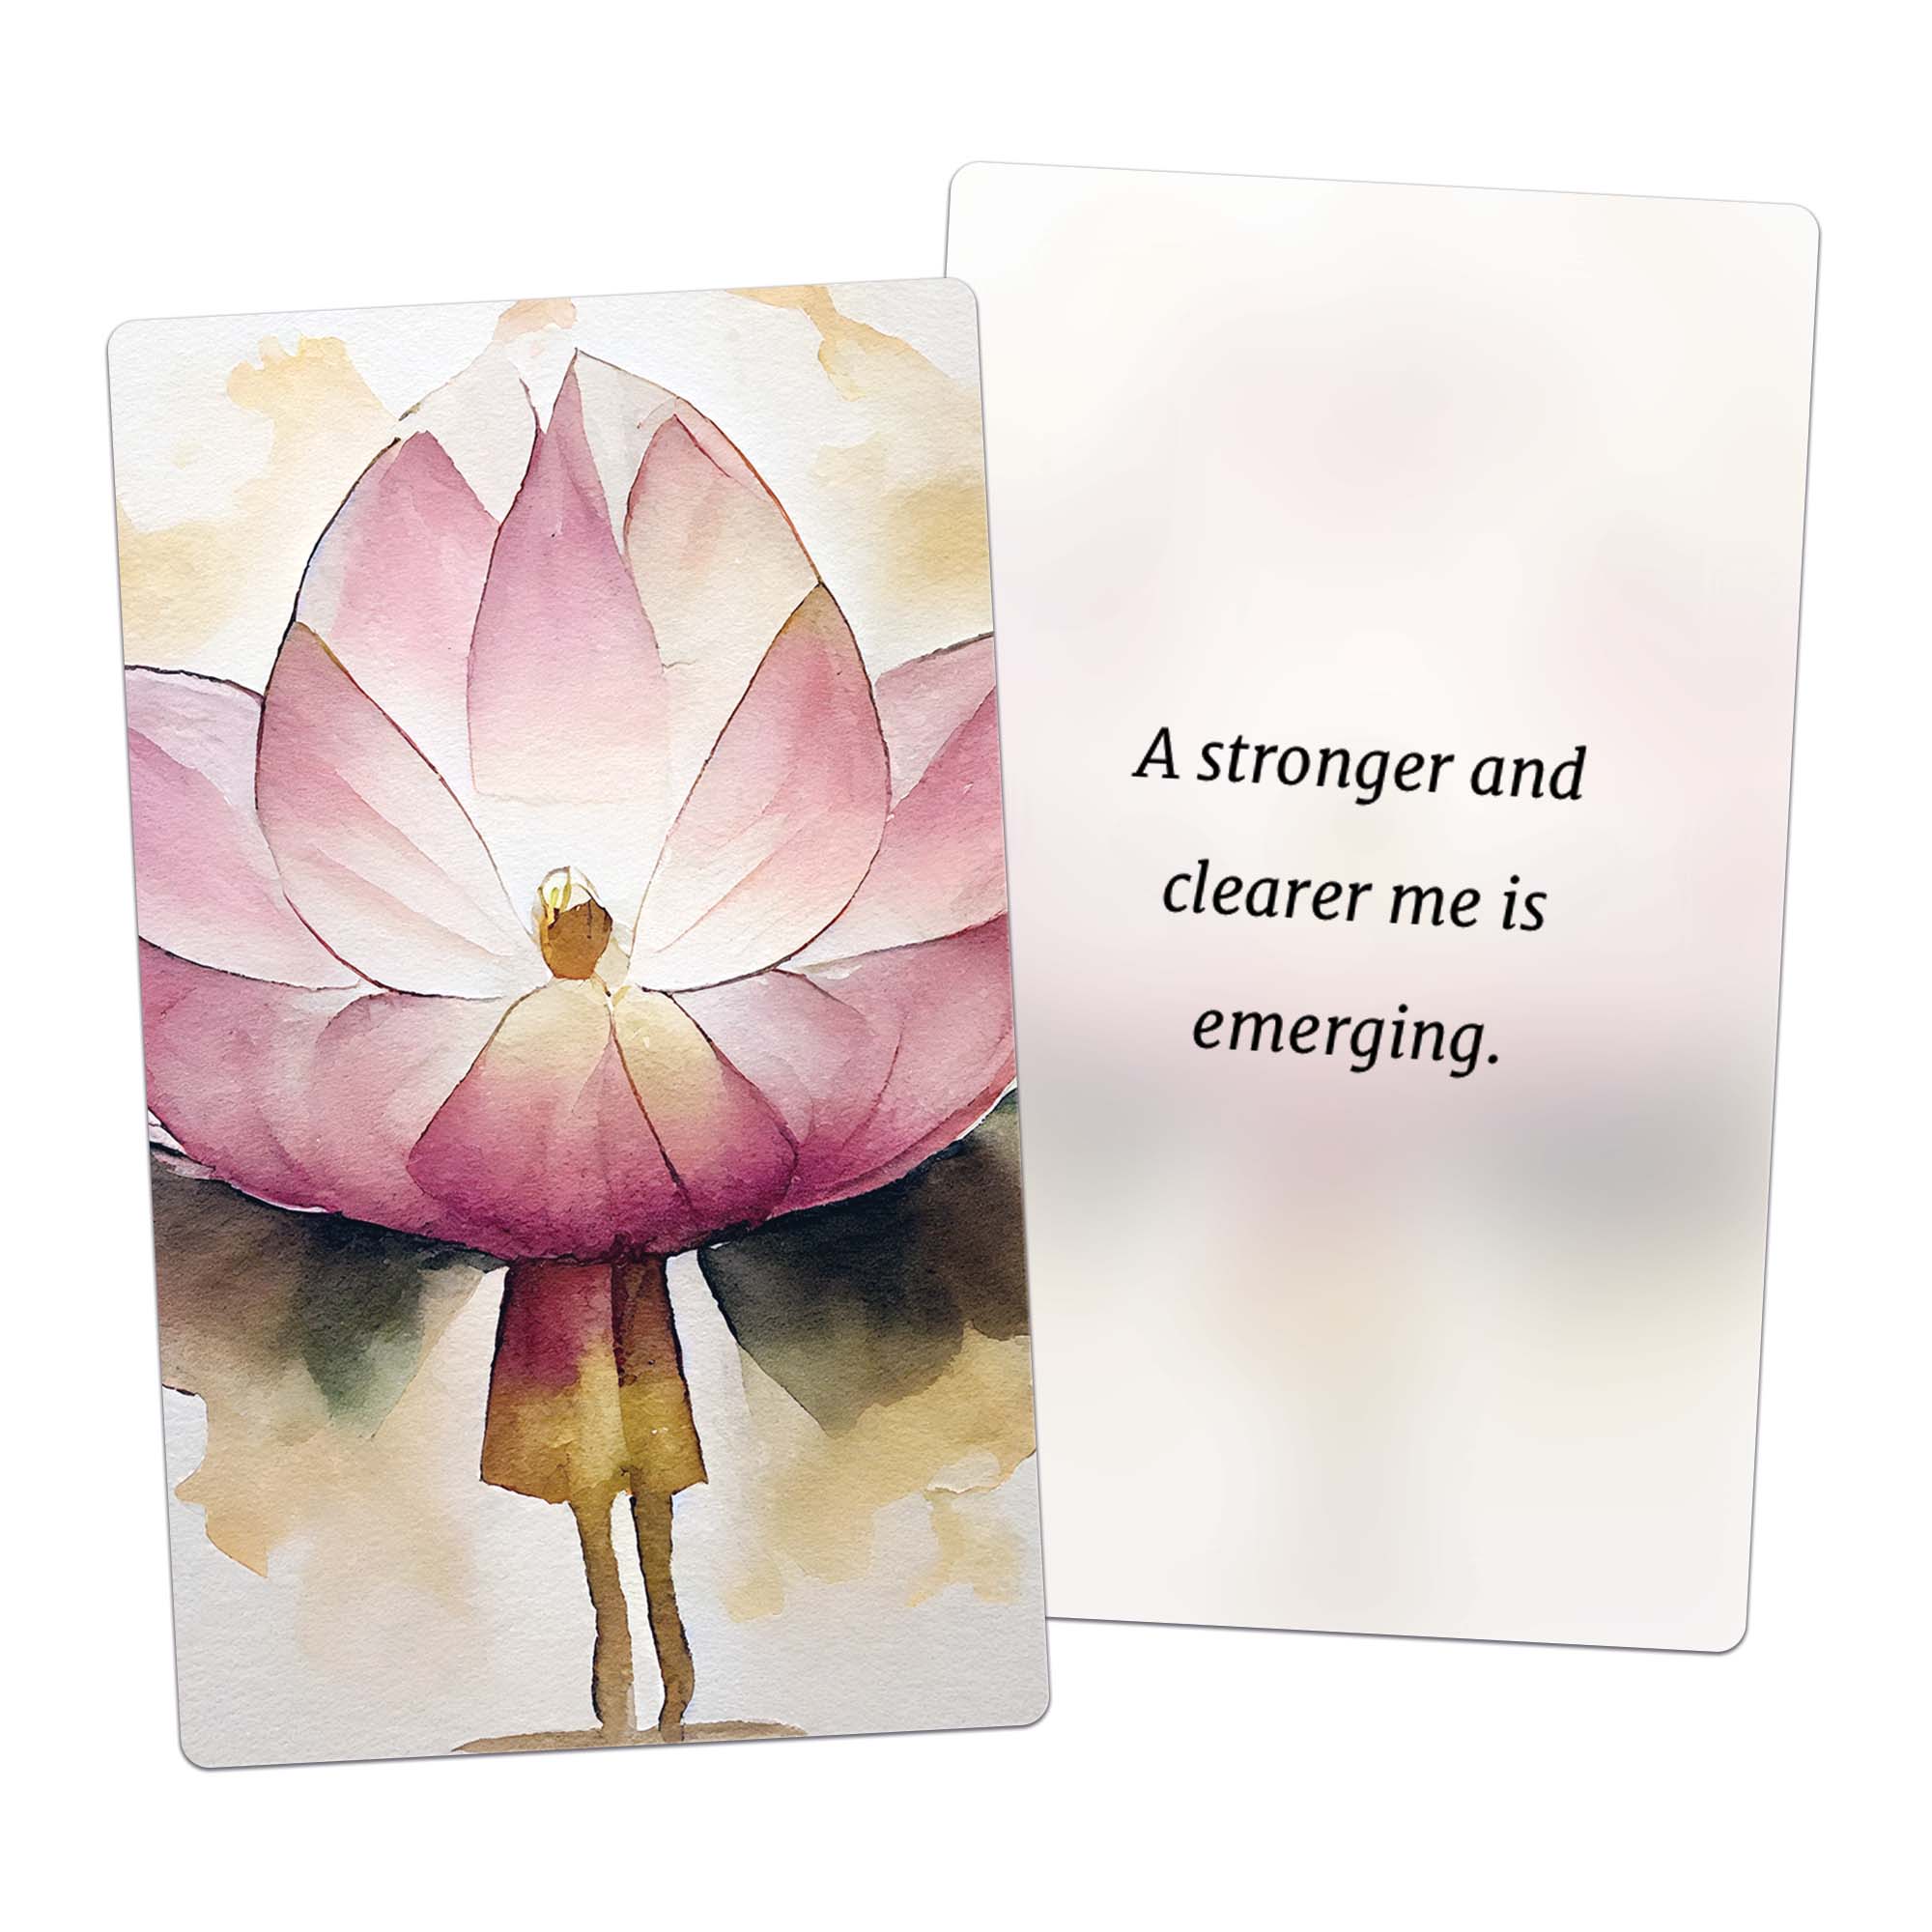 A stronger and clearer me is emerging. (AFFIRMATION CARD)